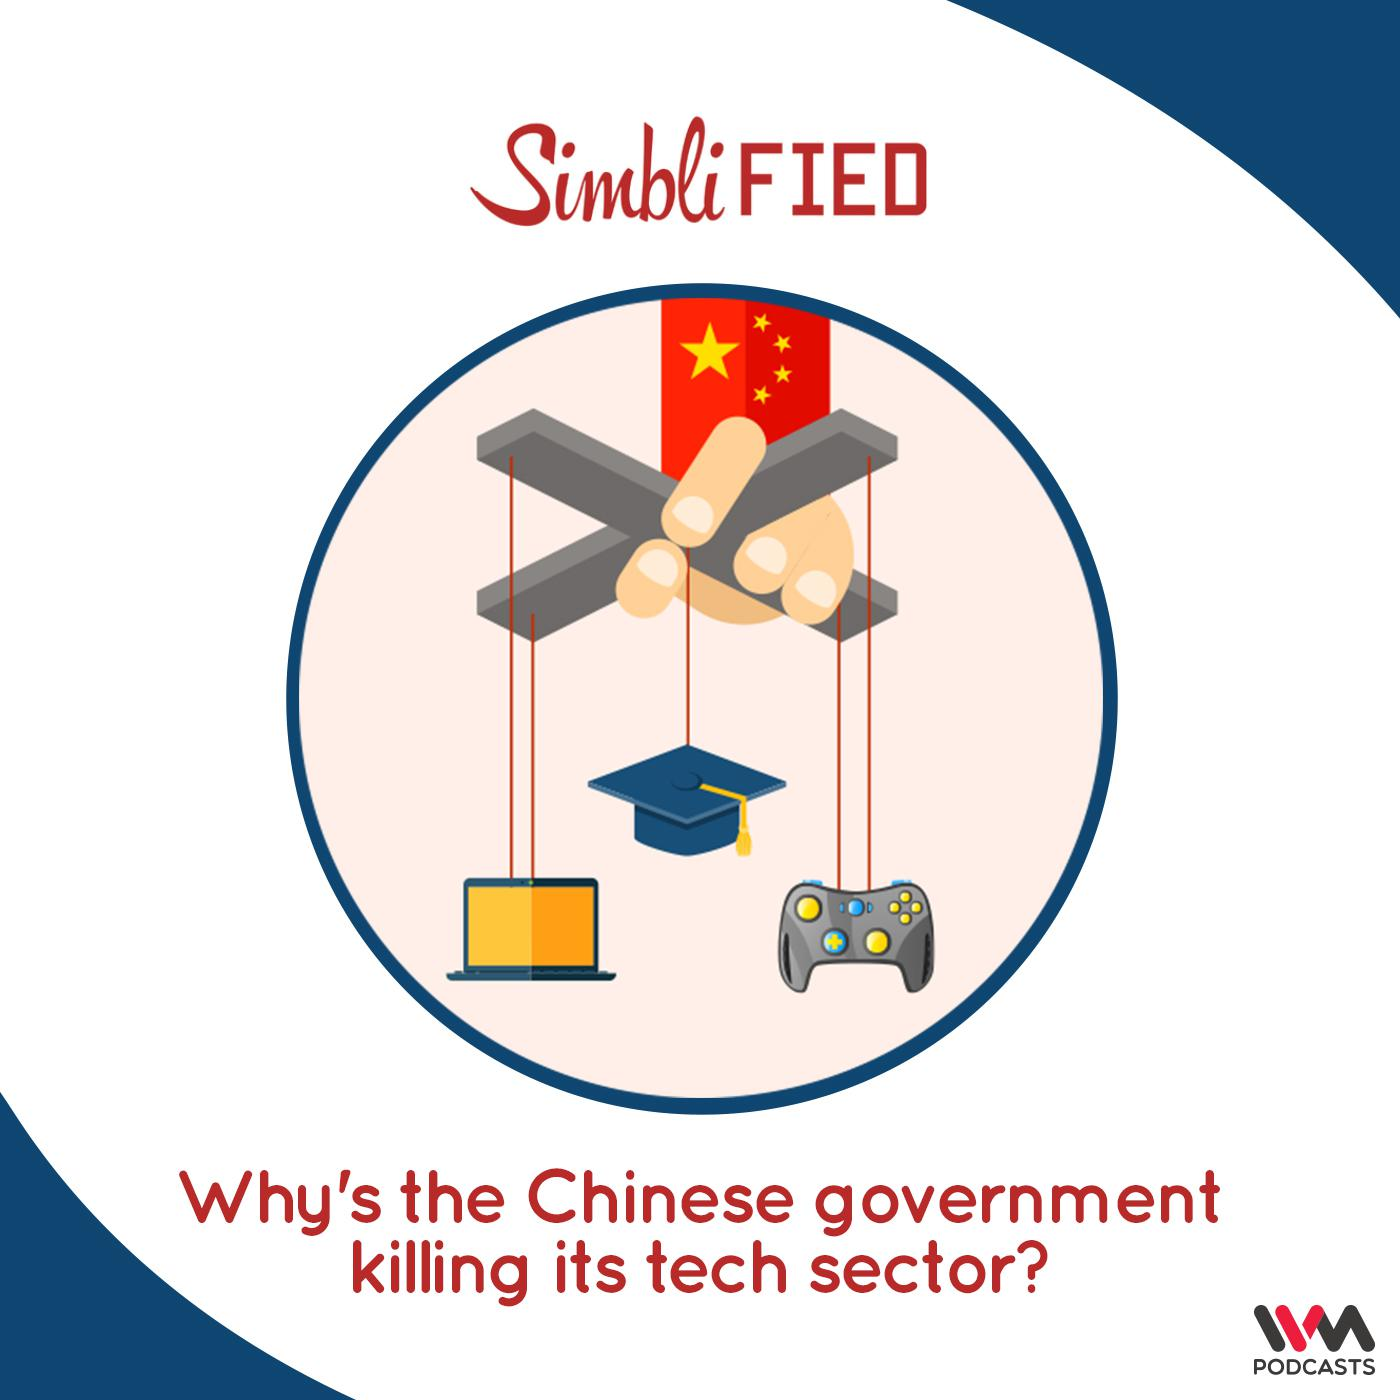 Why’s the Chinese government killing its tech sector?